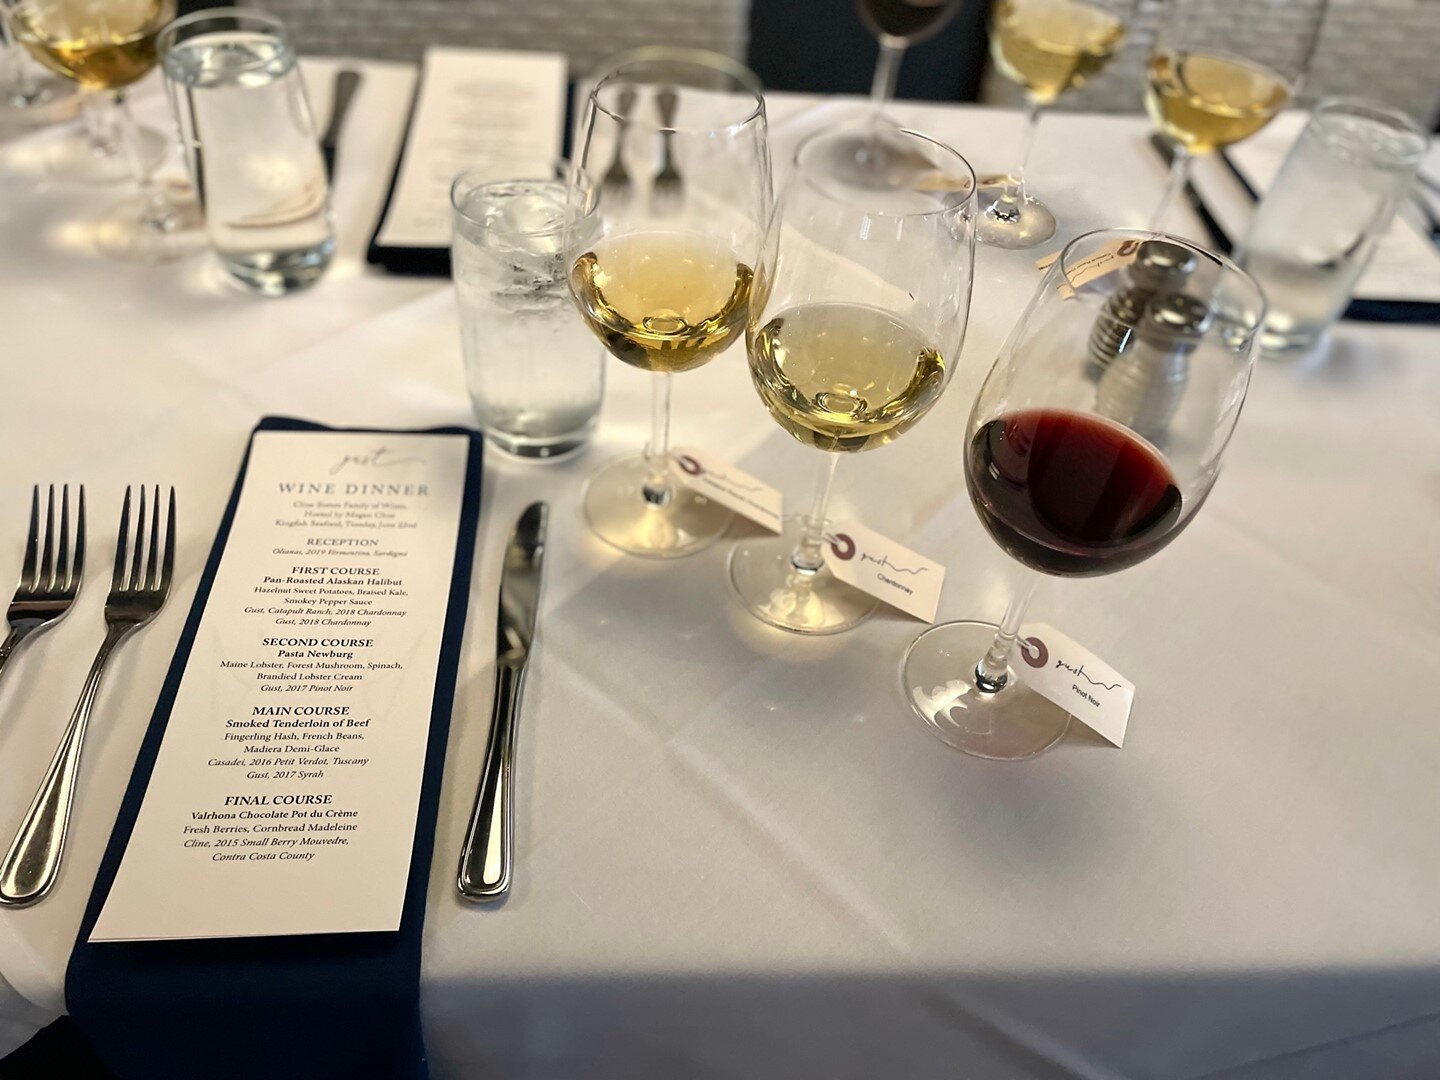 We had a blast hosting the Gust Wine Dinner last week! 🍷⁠
⁠
If you missed it, be sure to visit our website and sign up to become a VIP, so you can stay up to date about the latest and greatest at Hospitality Restaurants. ⁠
⁠
⁠
⁠
#fairlawn #seafood #